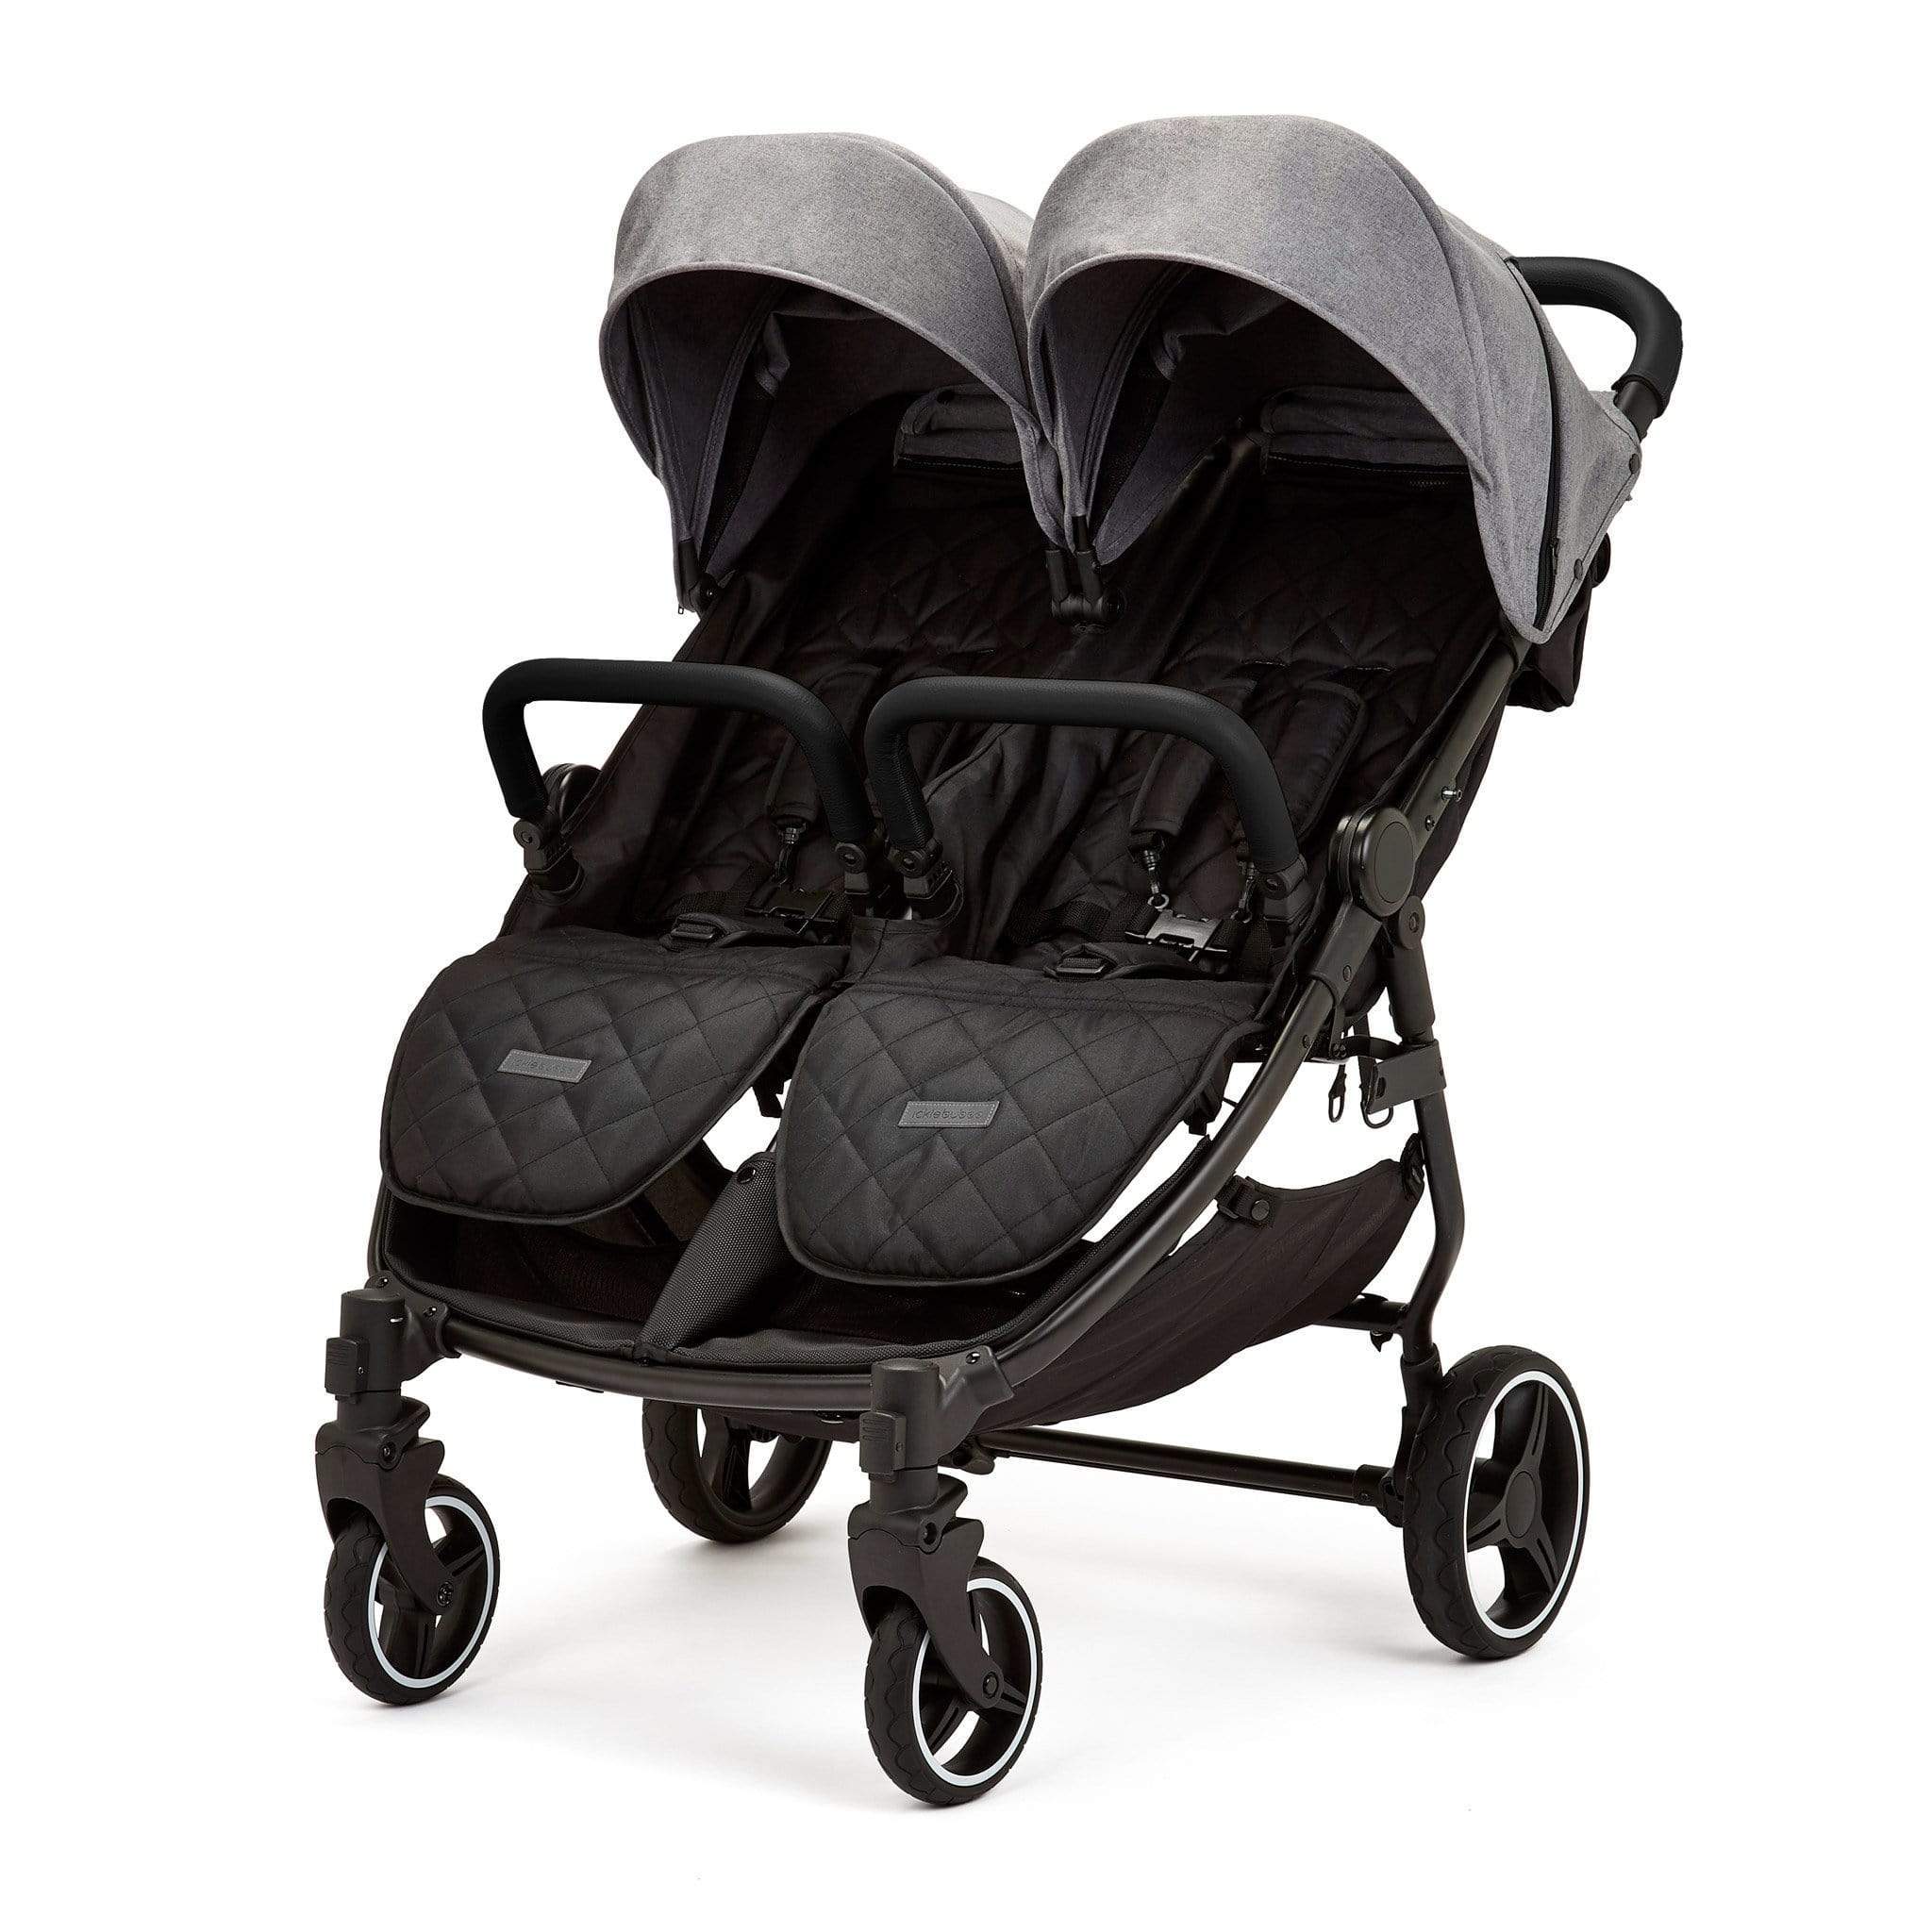 Ickle Bubba double buggies Ickle Bubba Venus Prime Double Stroller Black/Space Grey/Black 16-004-300-014